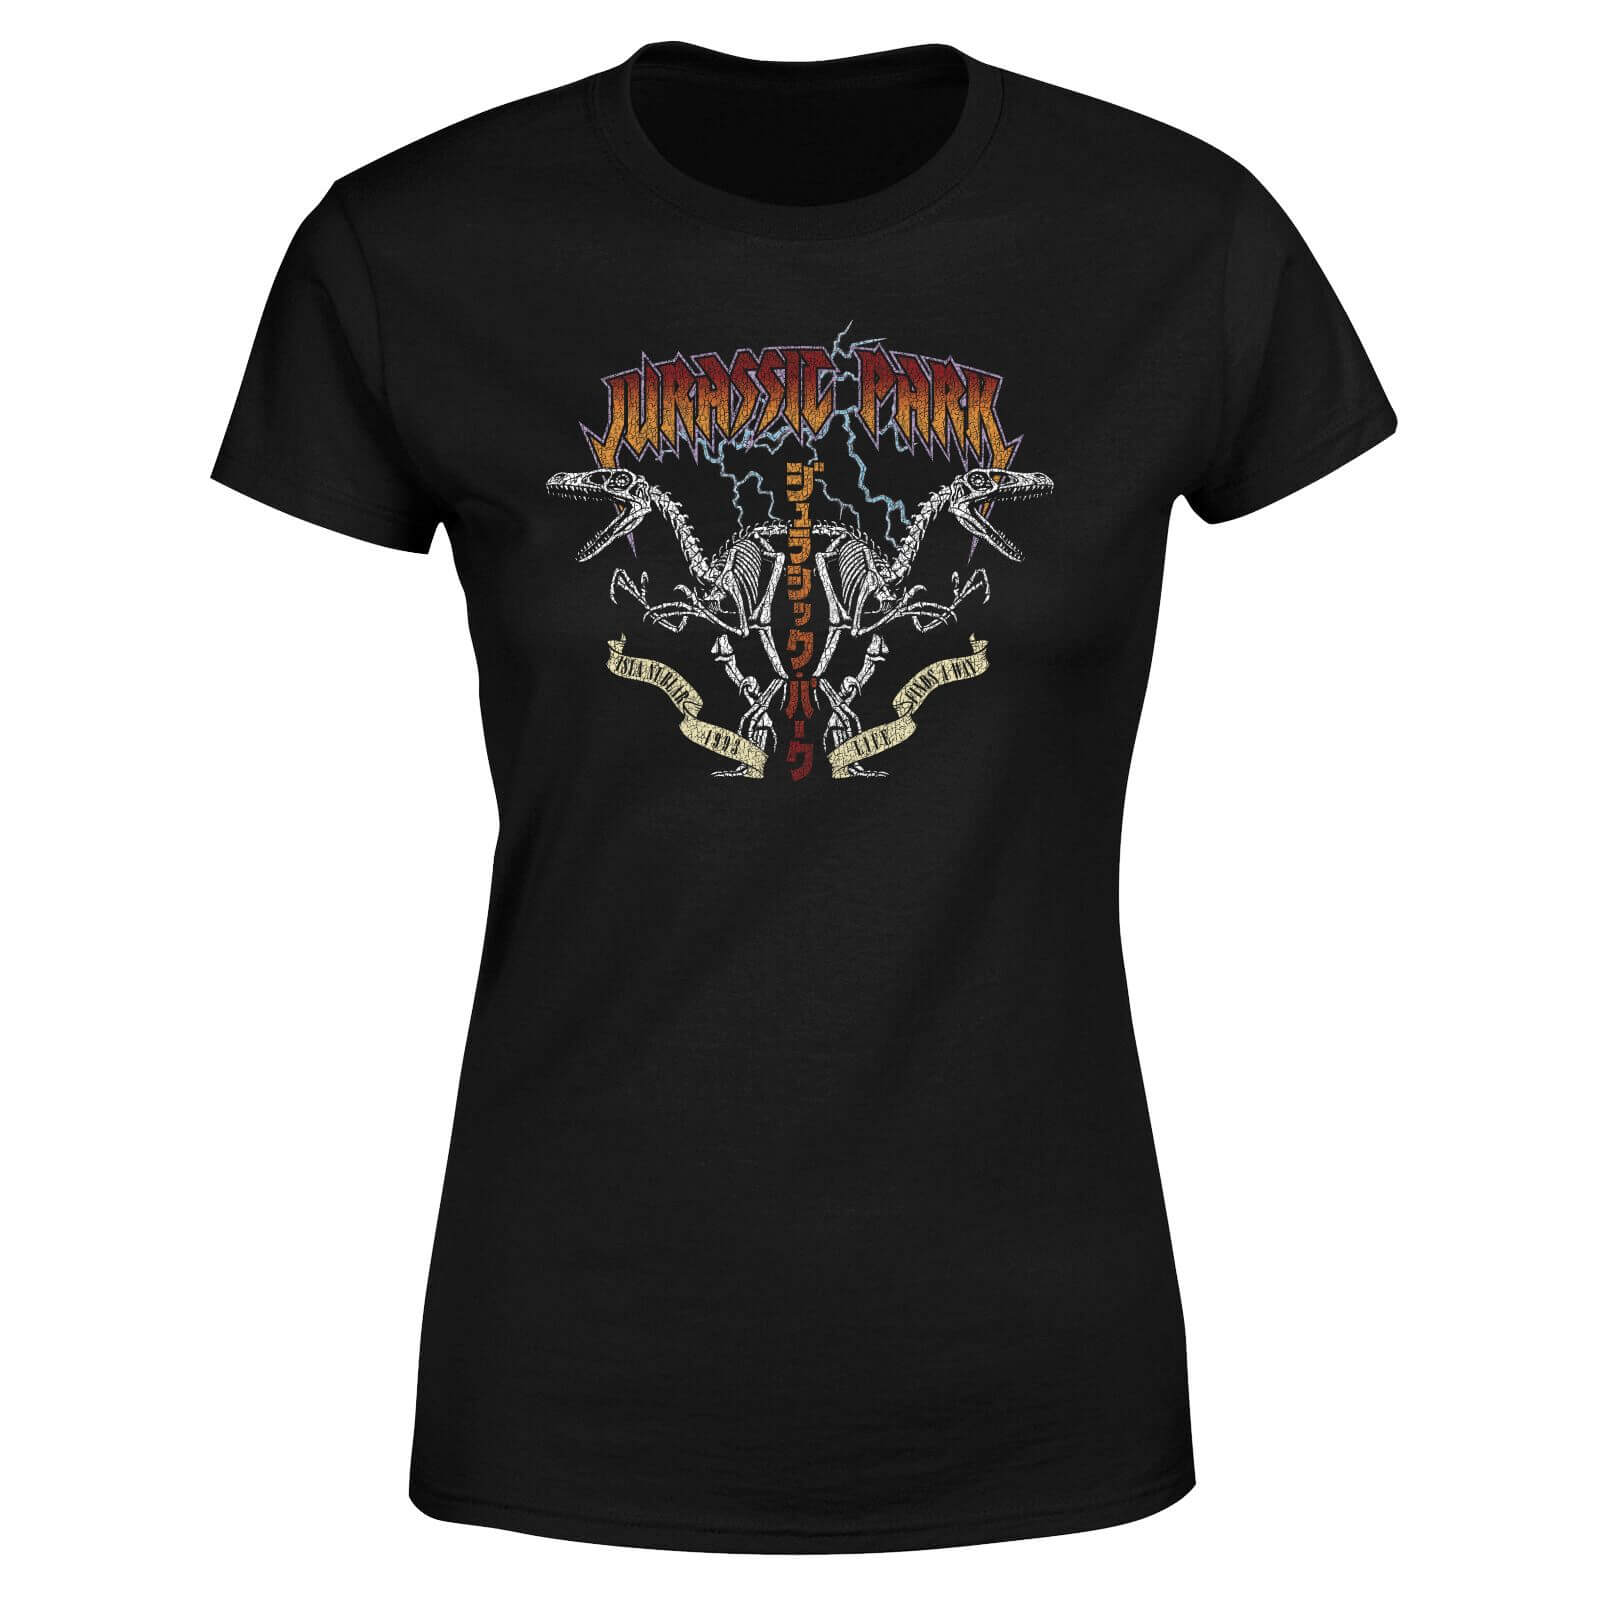 View the best prices for: womens jurassic park raptor twinz t-shirt